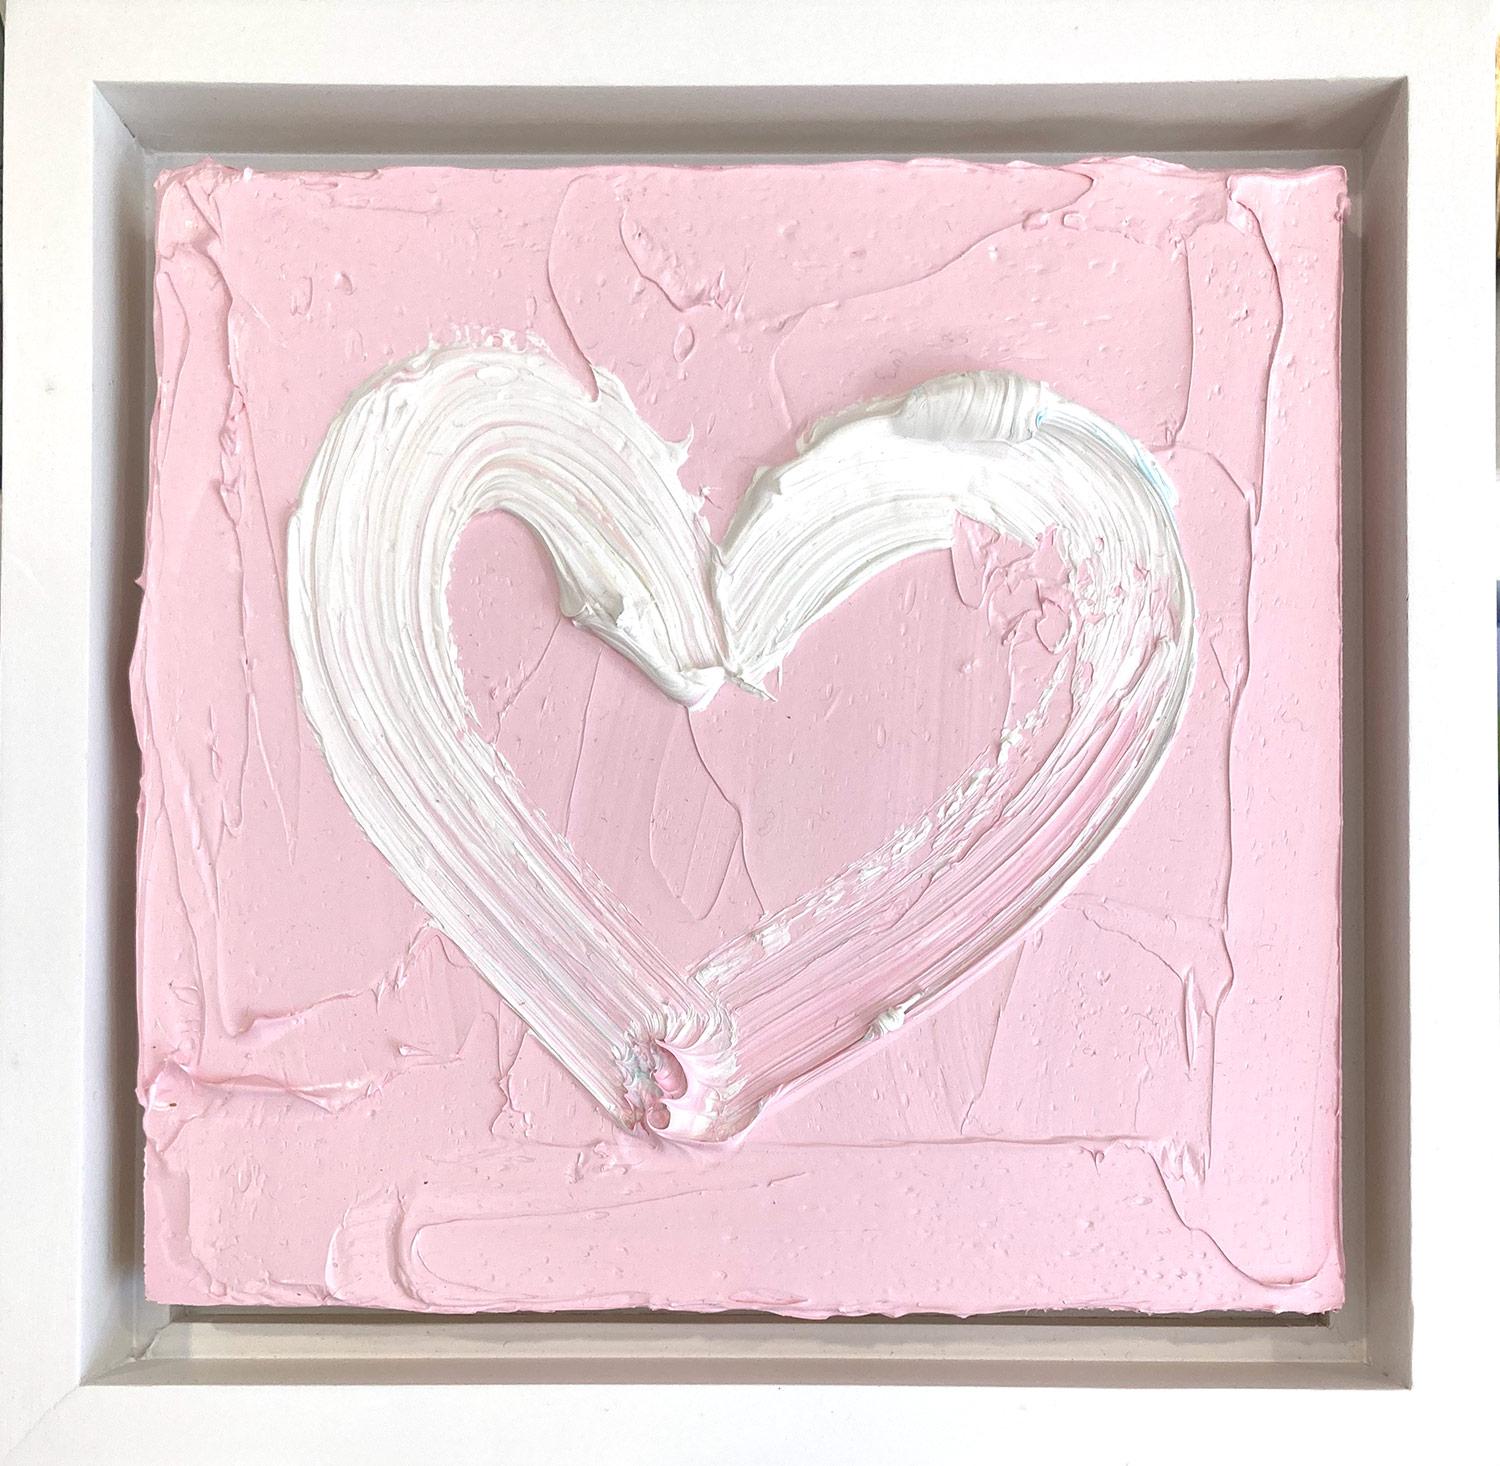 Abstract Painting Cindy Shaoul - Peinture à l'huile pop art rose « My Something Pink Heart » avec cadre flottant blanc